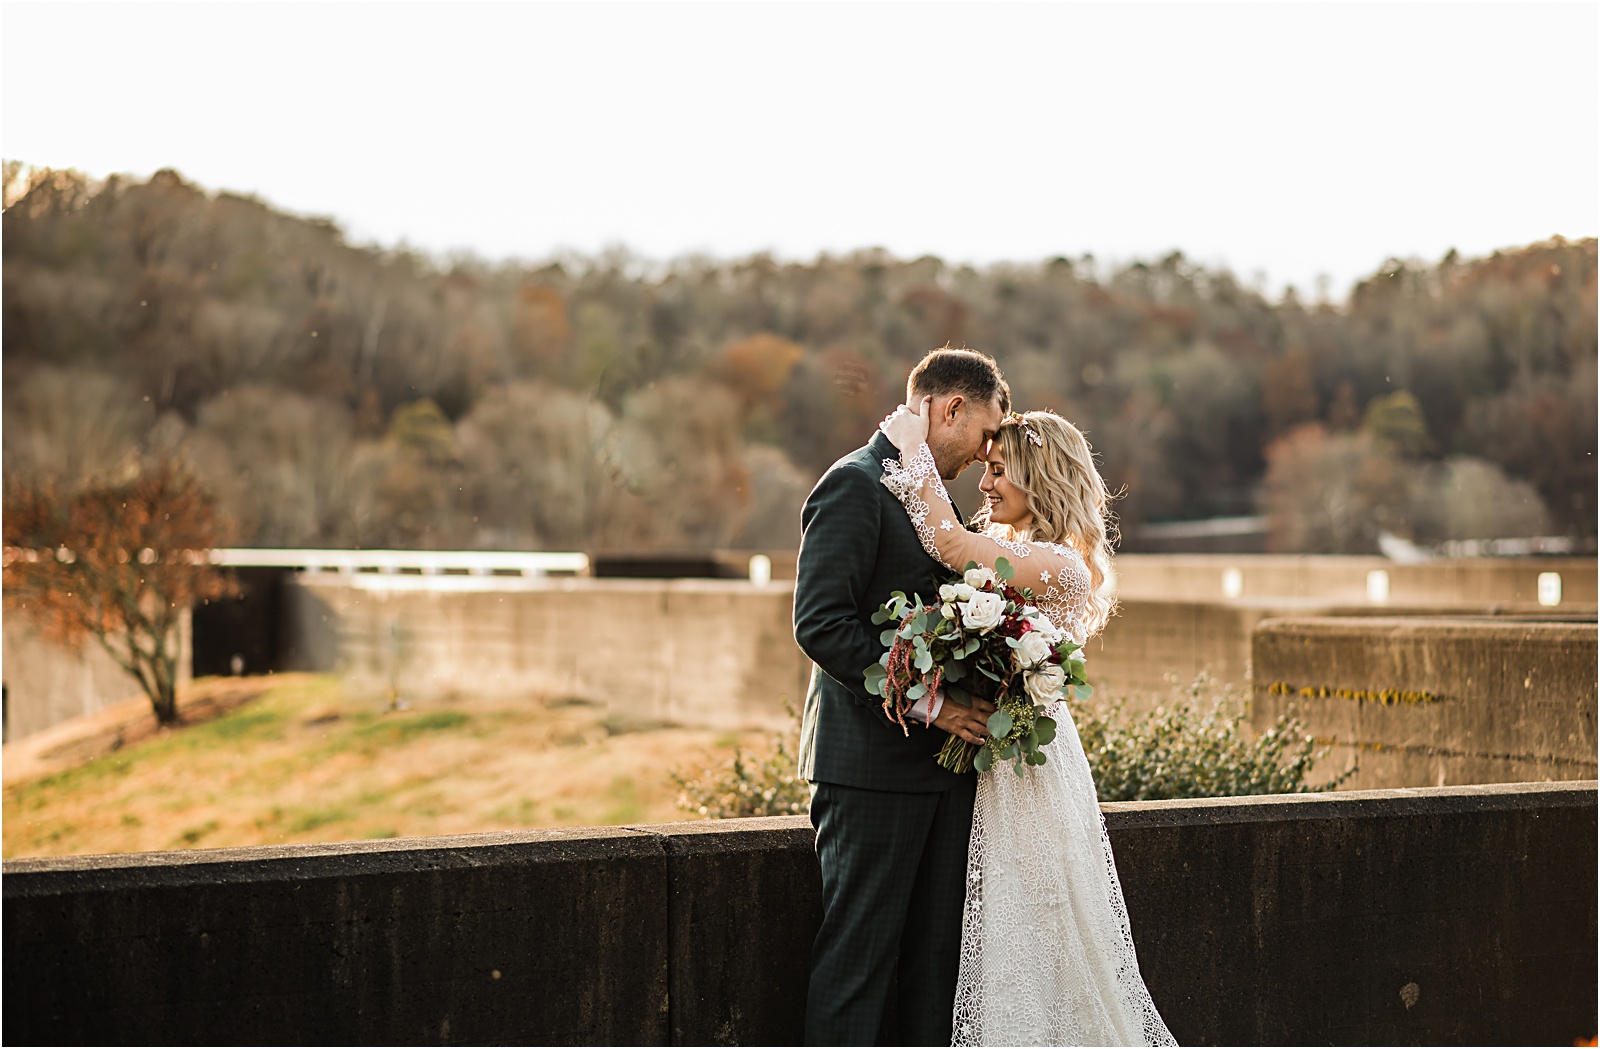 Amber Lowe Photo,B&G Catering,Beauty by Blaire,East Tennessee Wedding Photographer,Fall in Knoxville,Knoxville Wedding Photographer,Mott's Floral,Norris Dam,Norris Tea Room,Tennessee Mountain Home,White Lace and Promises,